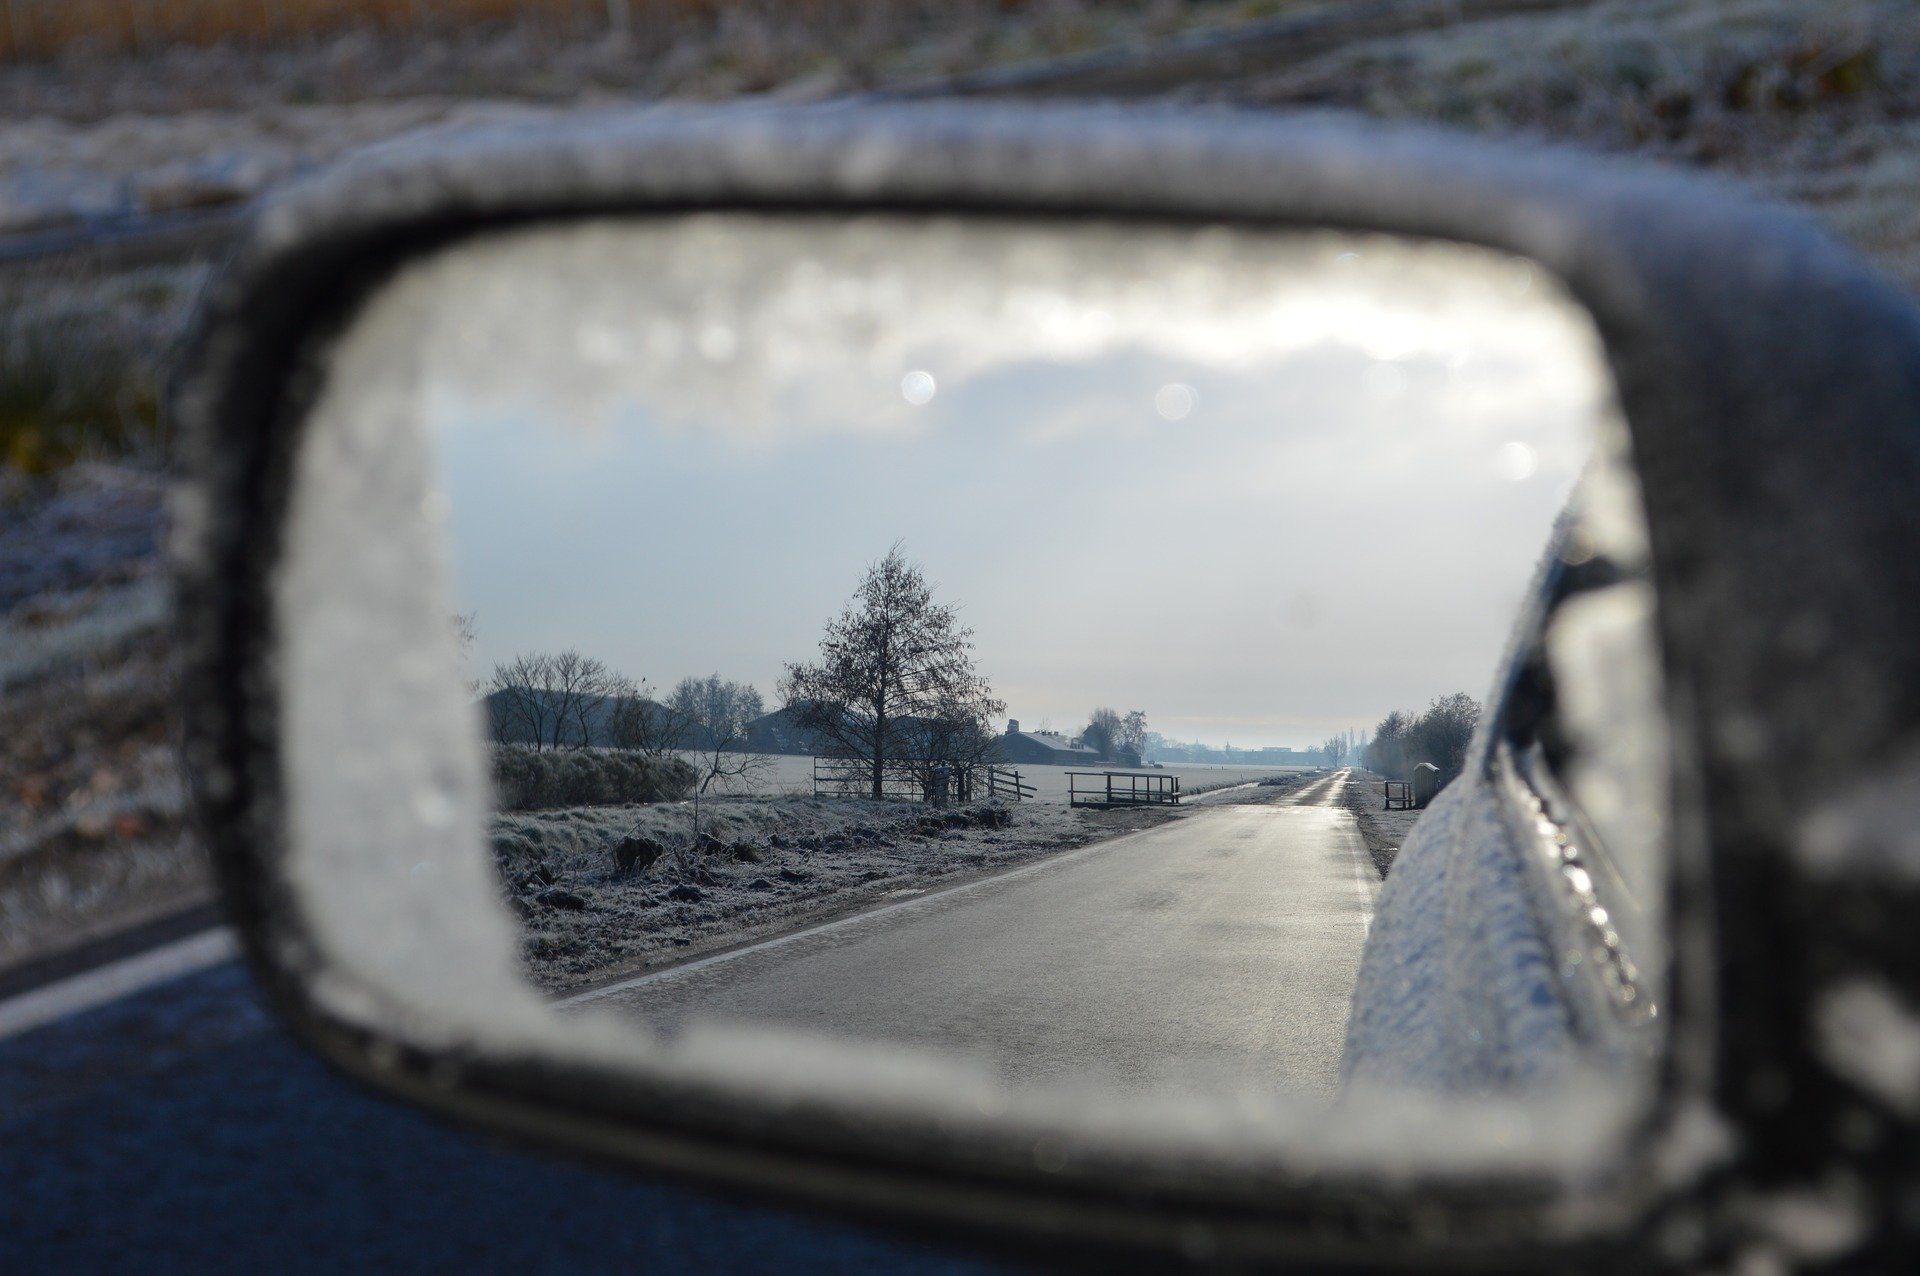 View into the heated exterior mirror in winter